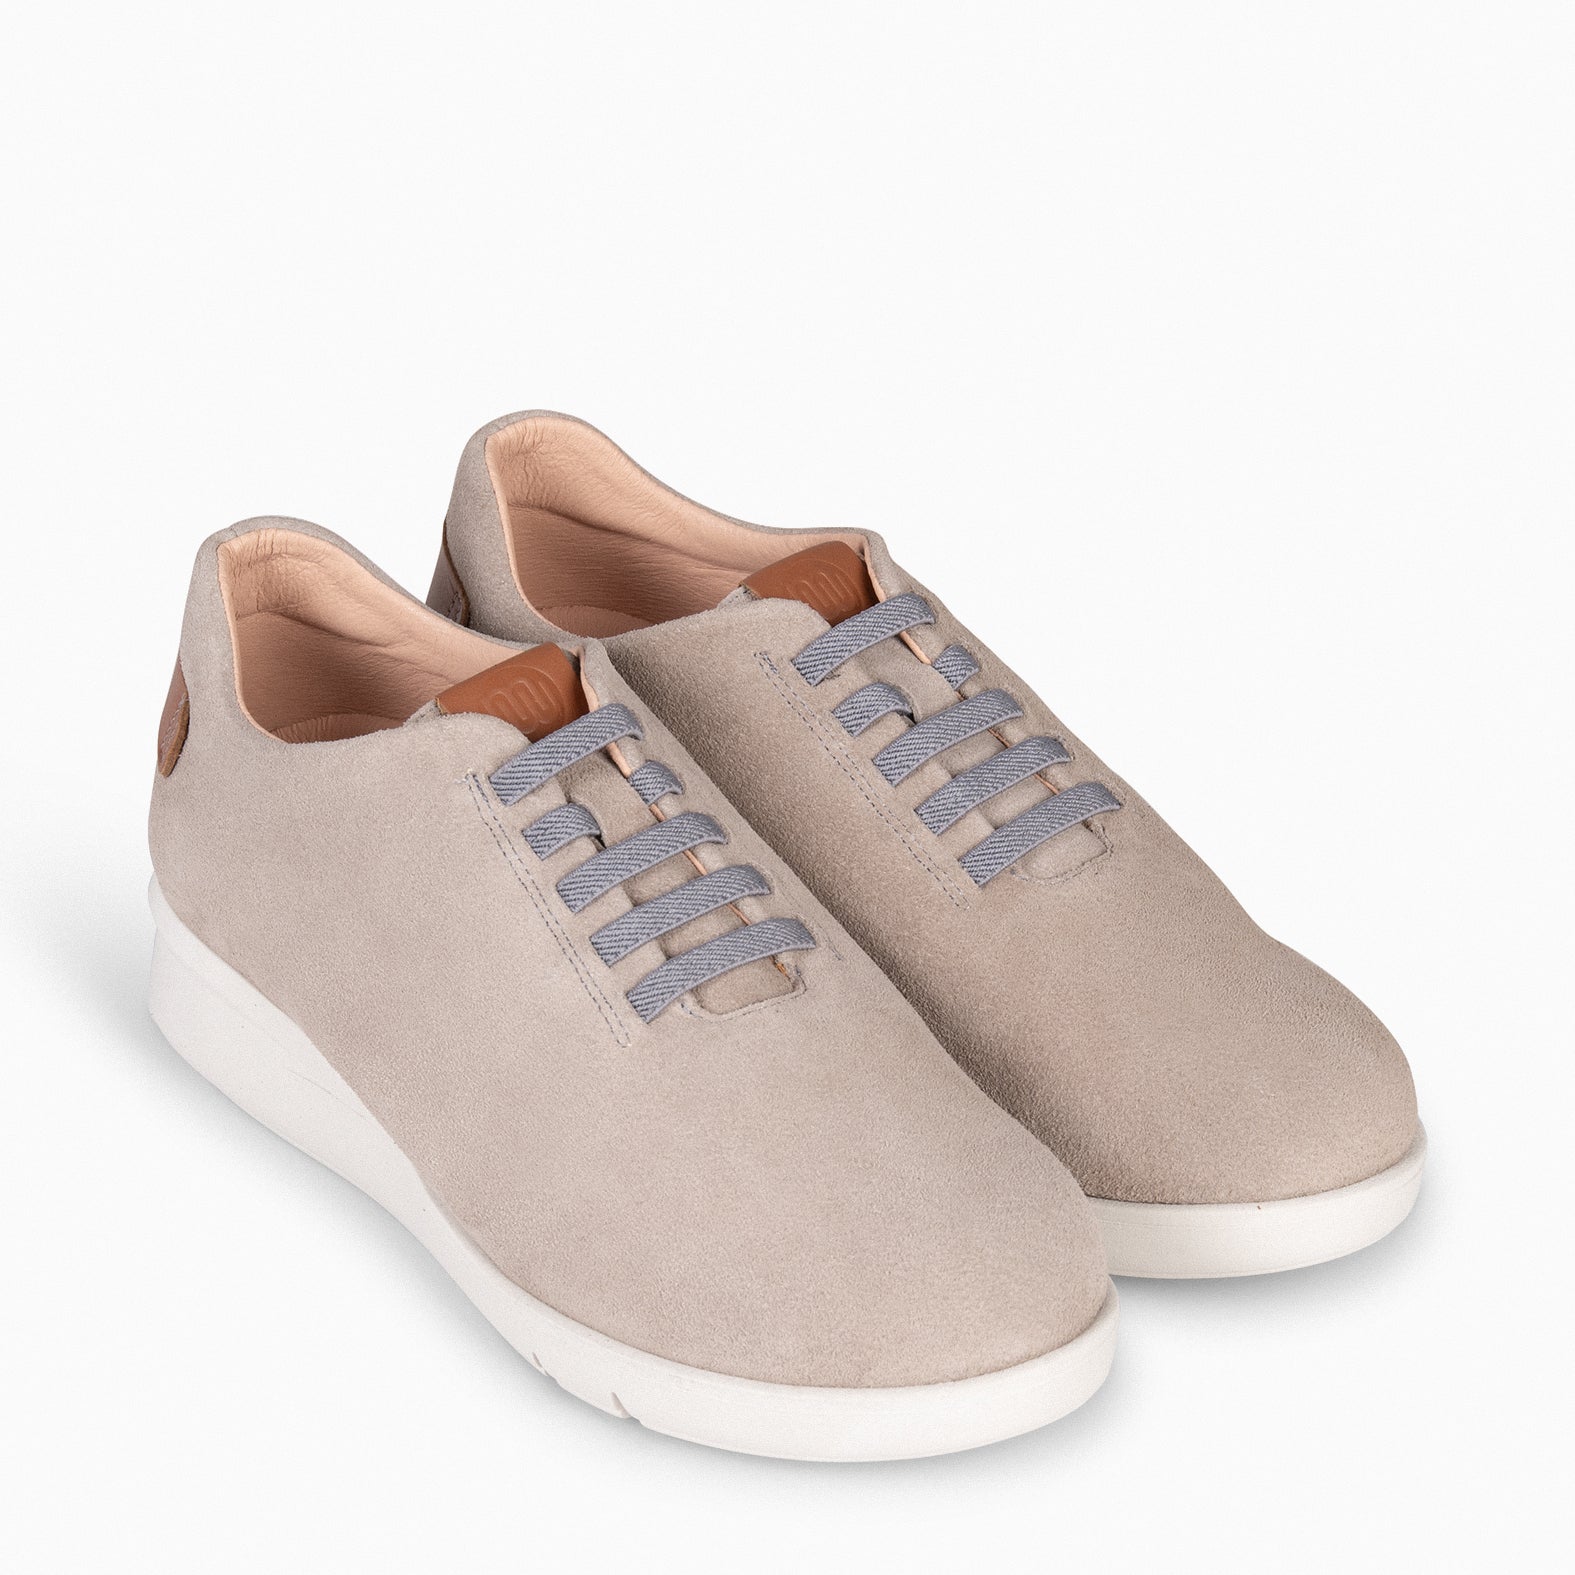 FLY – TAUPE casual sneaker with elastic laces